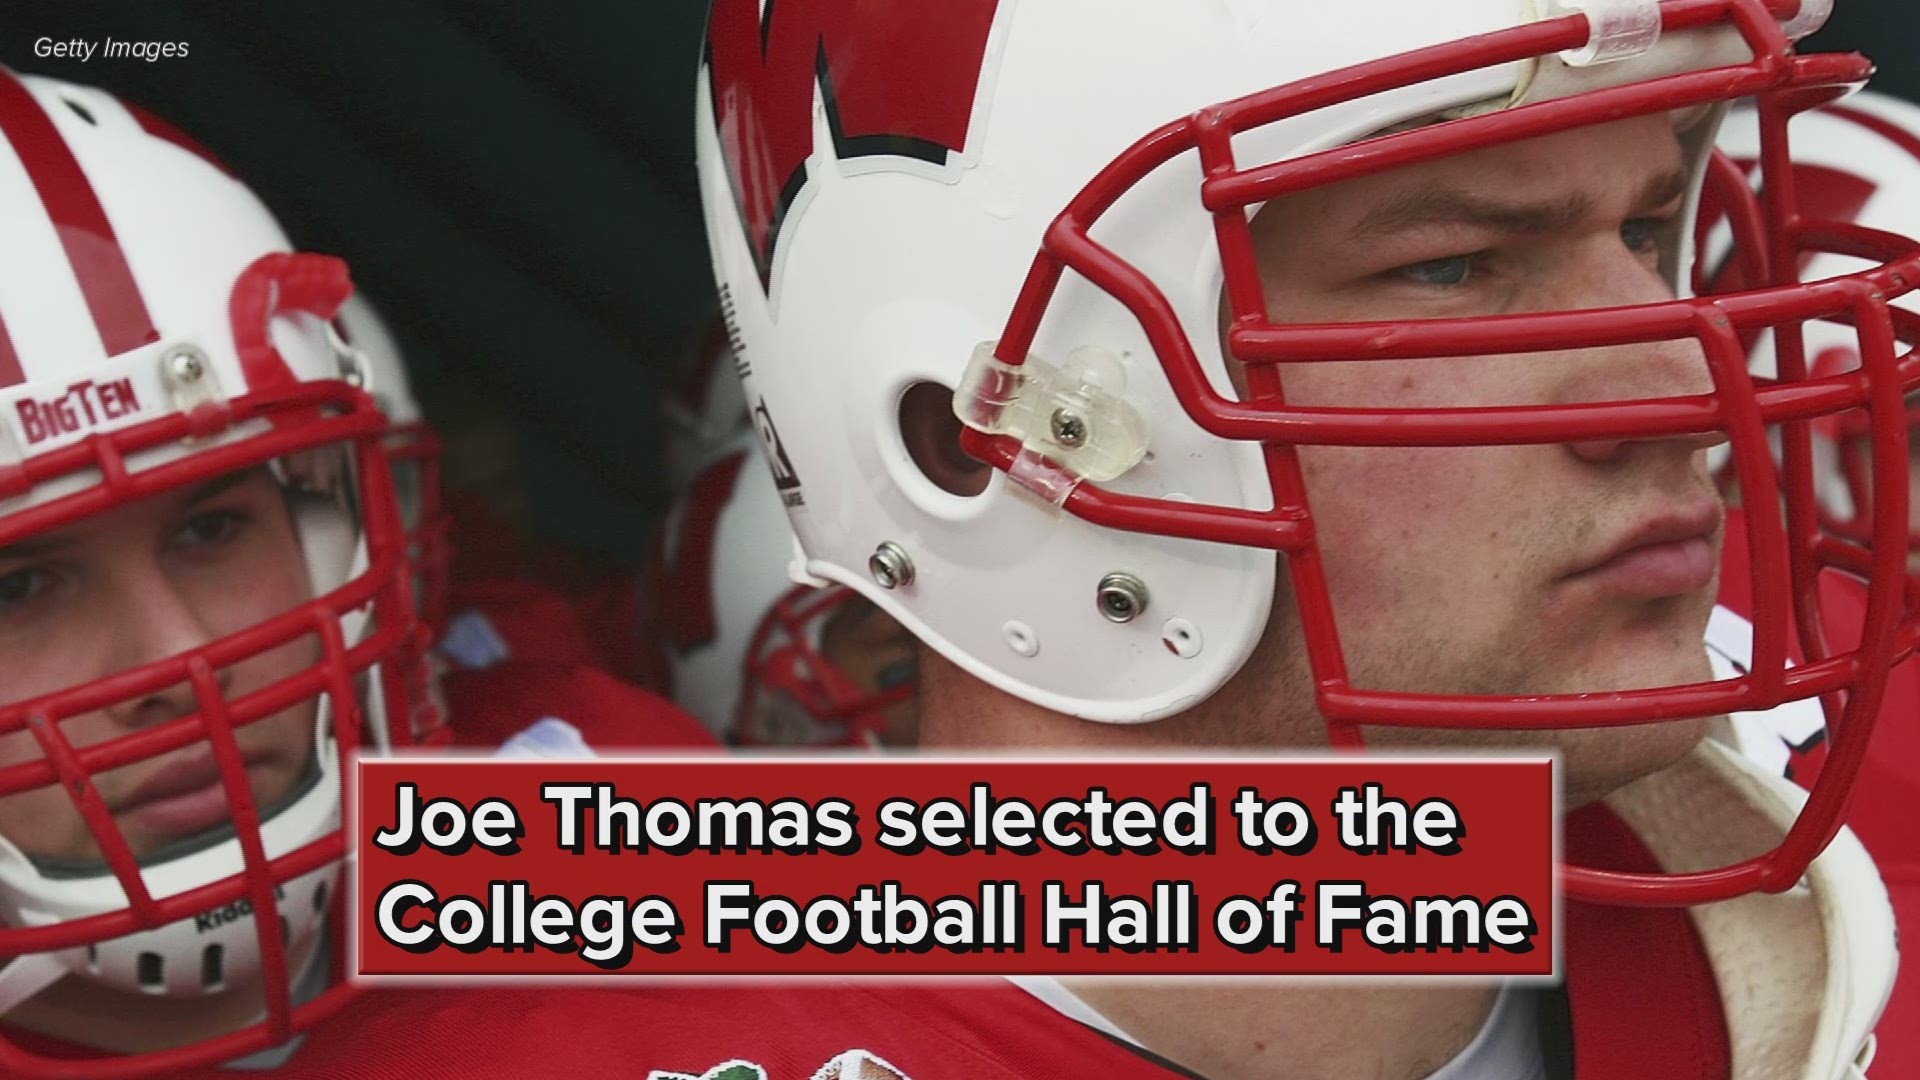 Thomas joins Texas quarterback Vince Young and USC defensive back Troy Polamalu in the 13-player class.